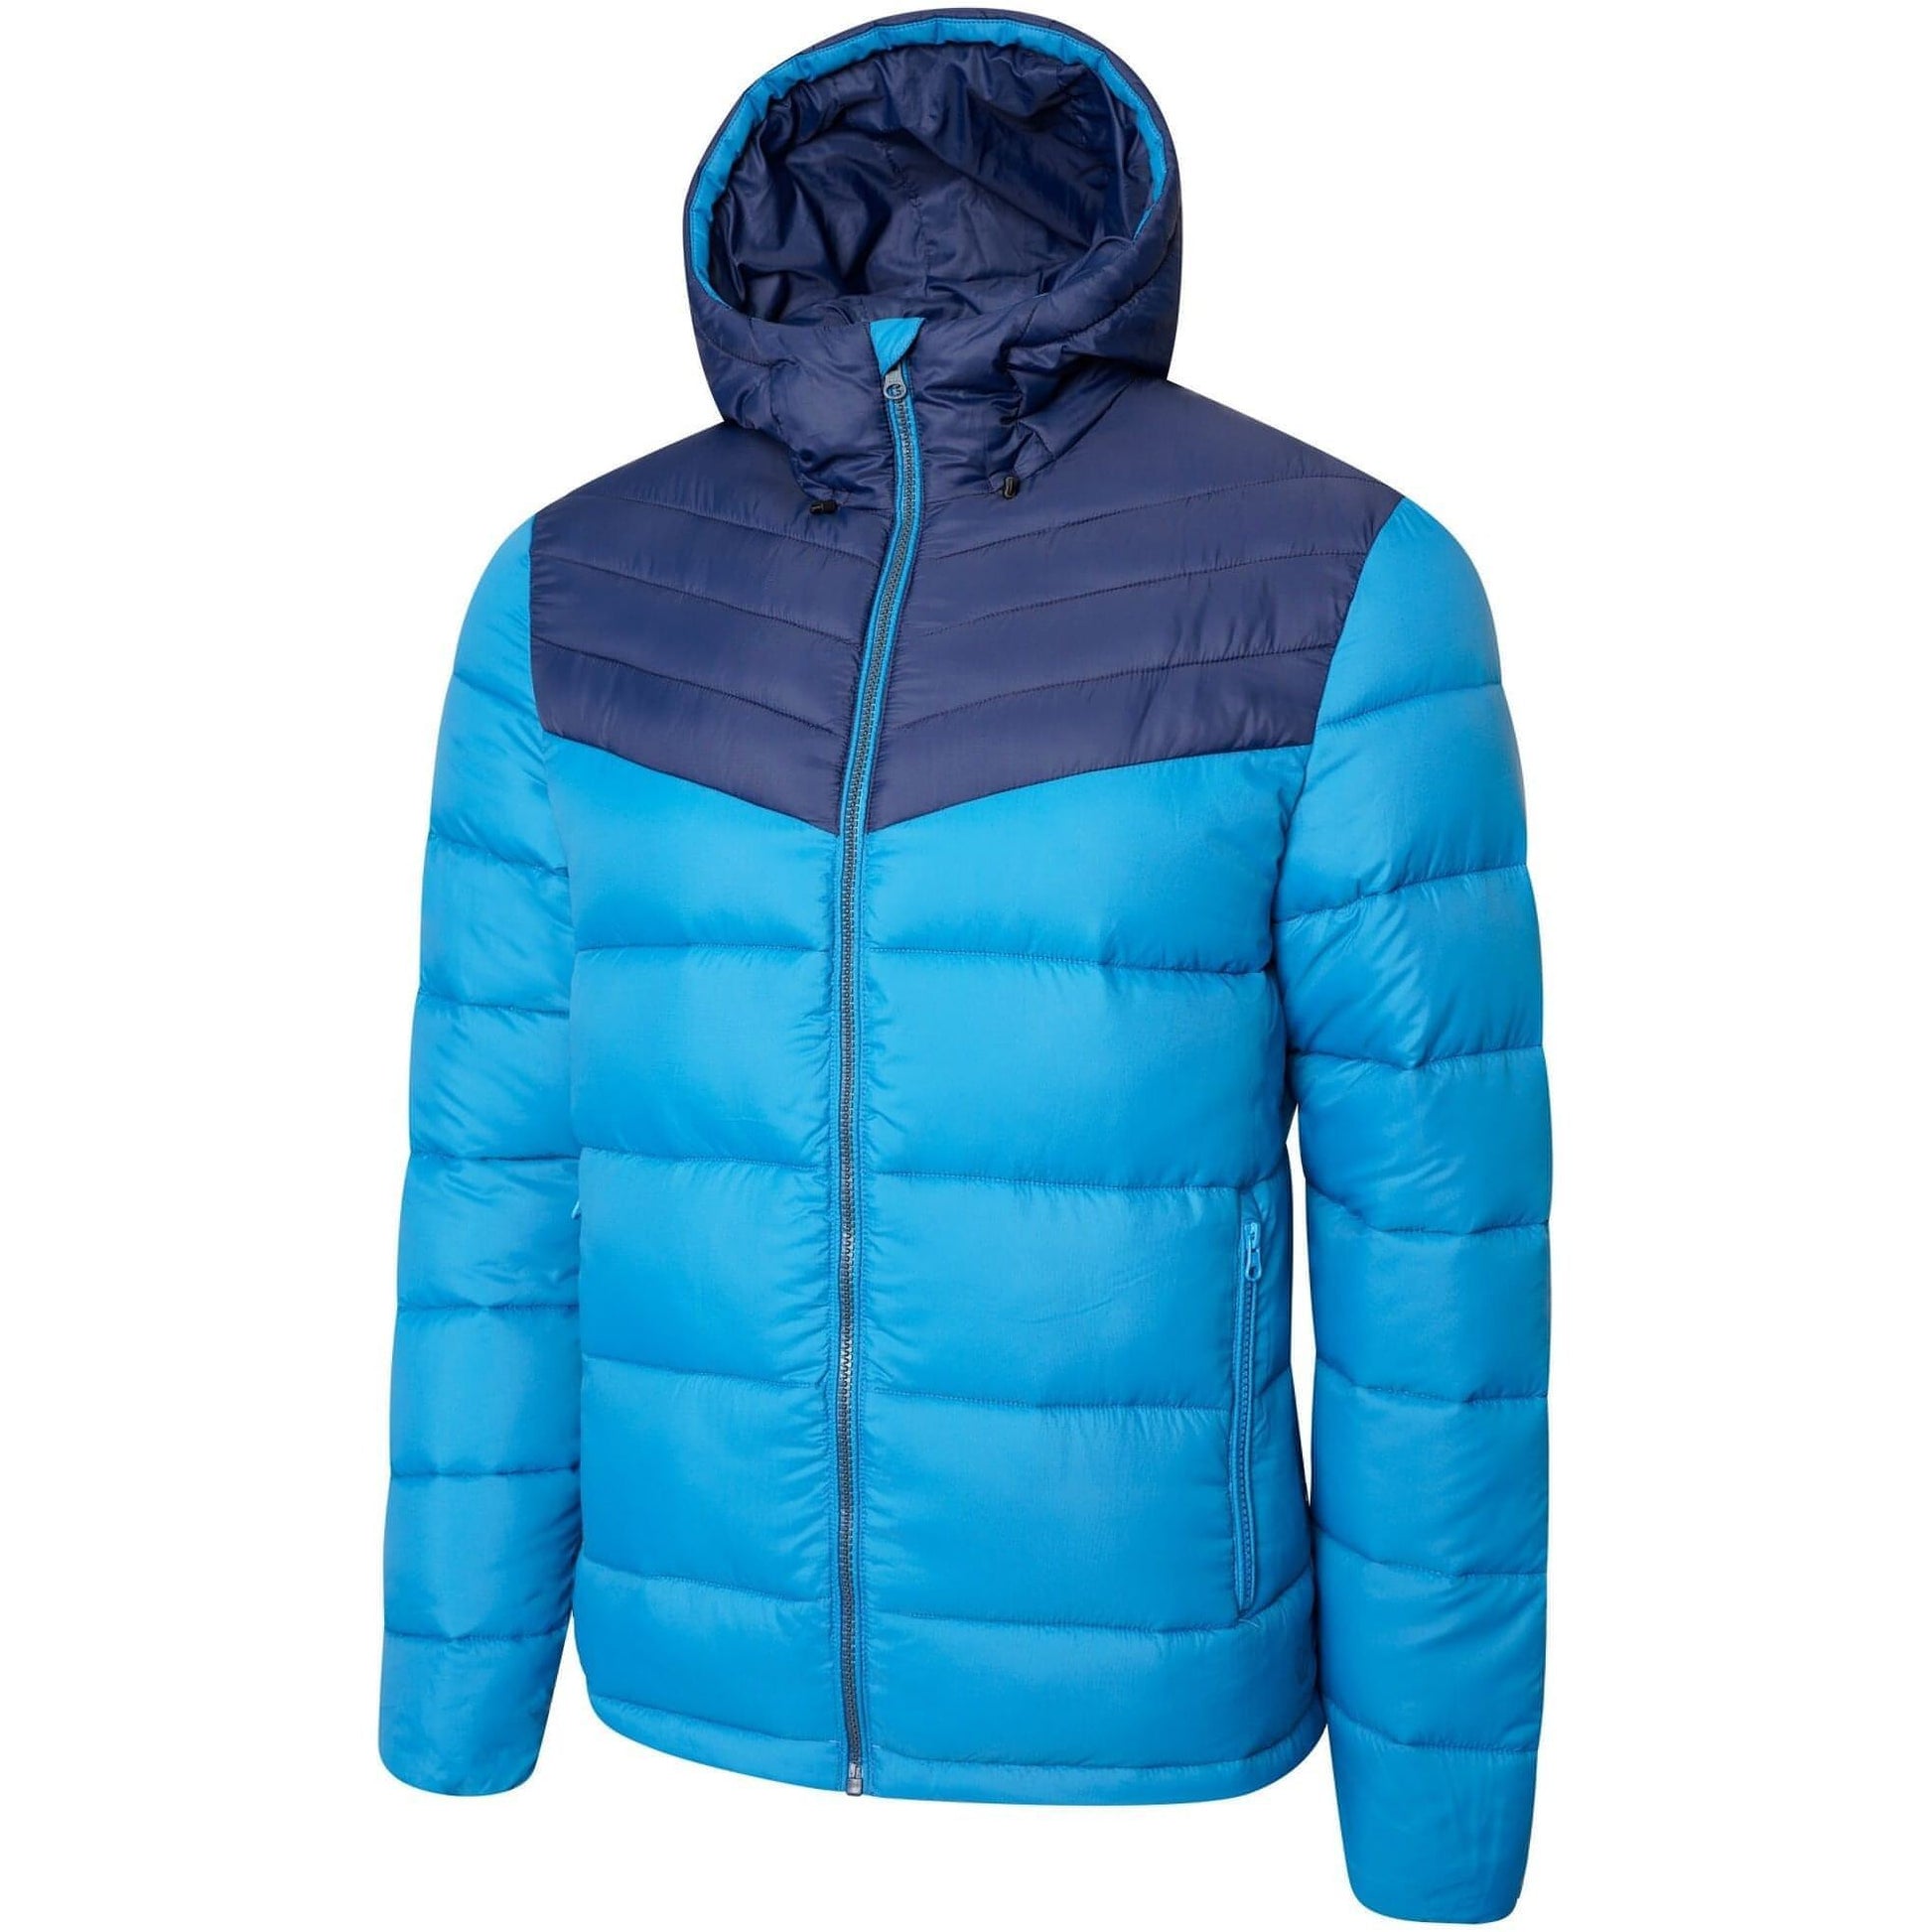 Dare2B Elite Hot Shot Insulated Jacket Dpn001 Agk Front - Front View